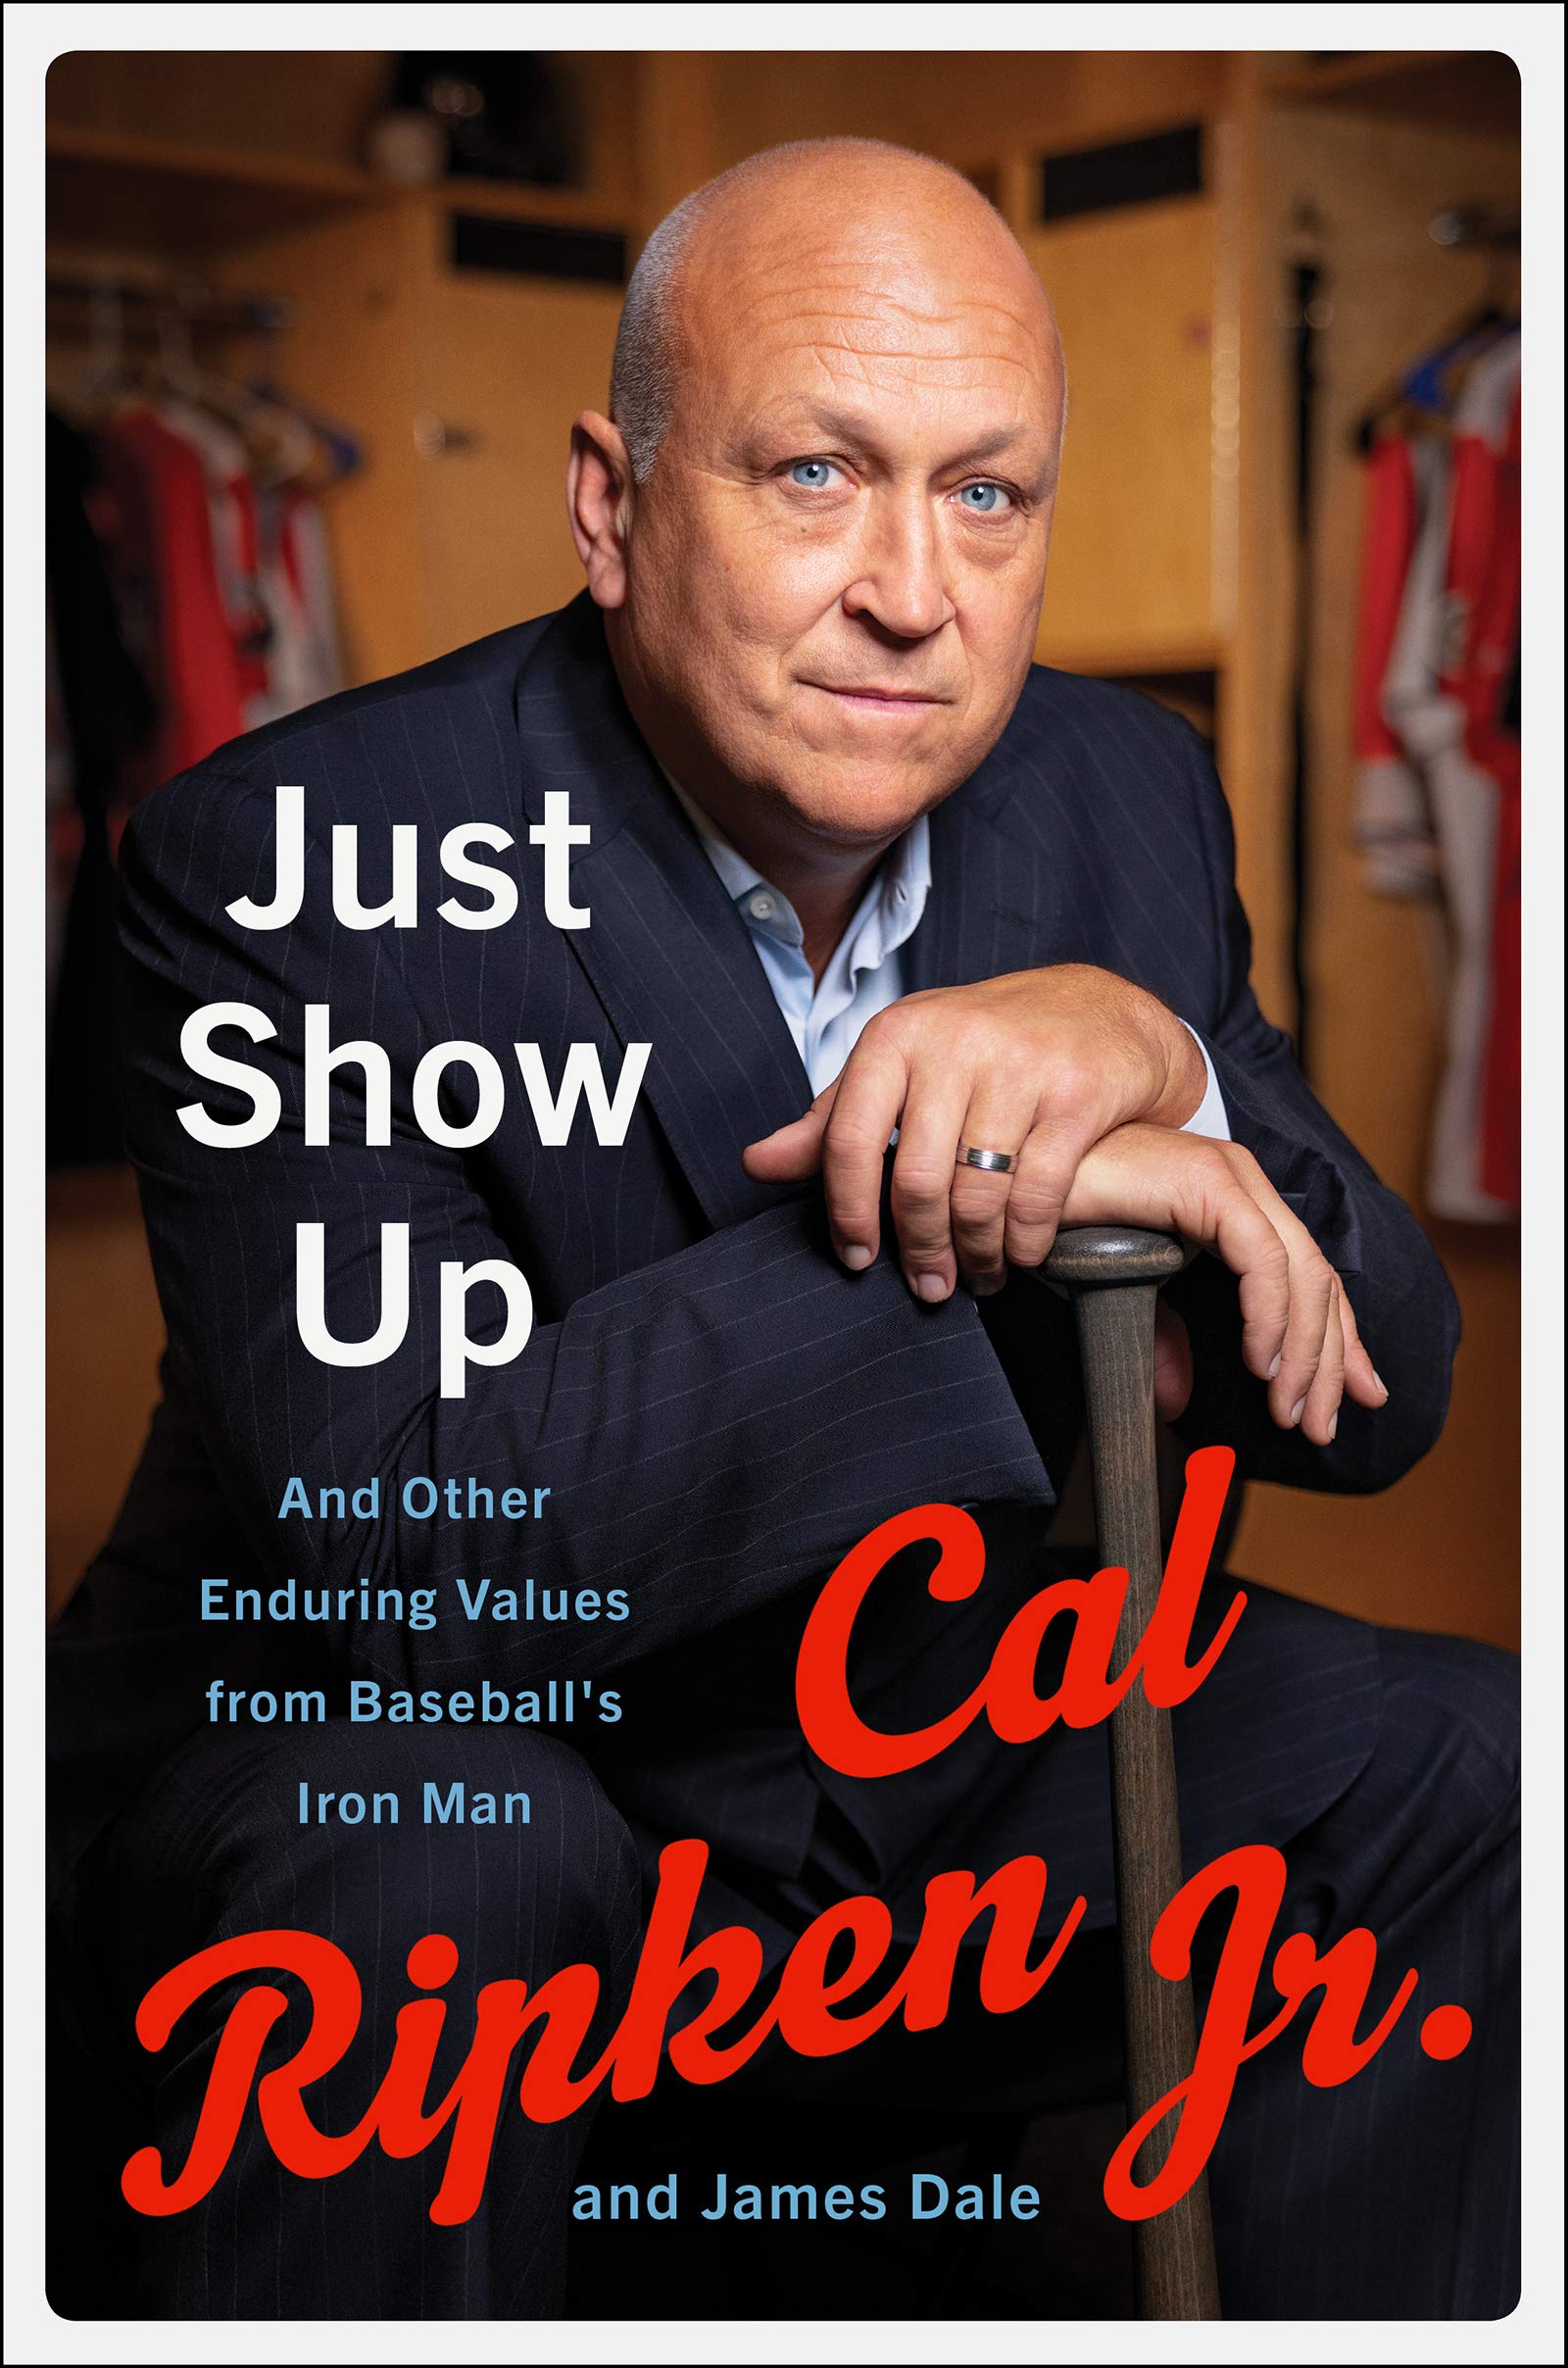 Cal Ripken Jr. “Just Show Up” Book Signing in May Book Signing Central